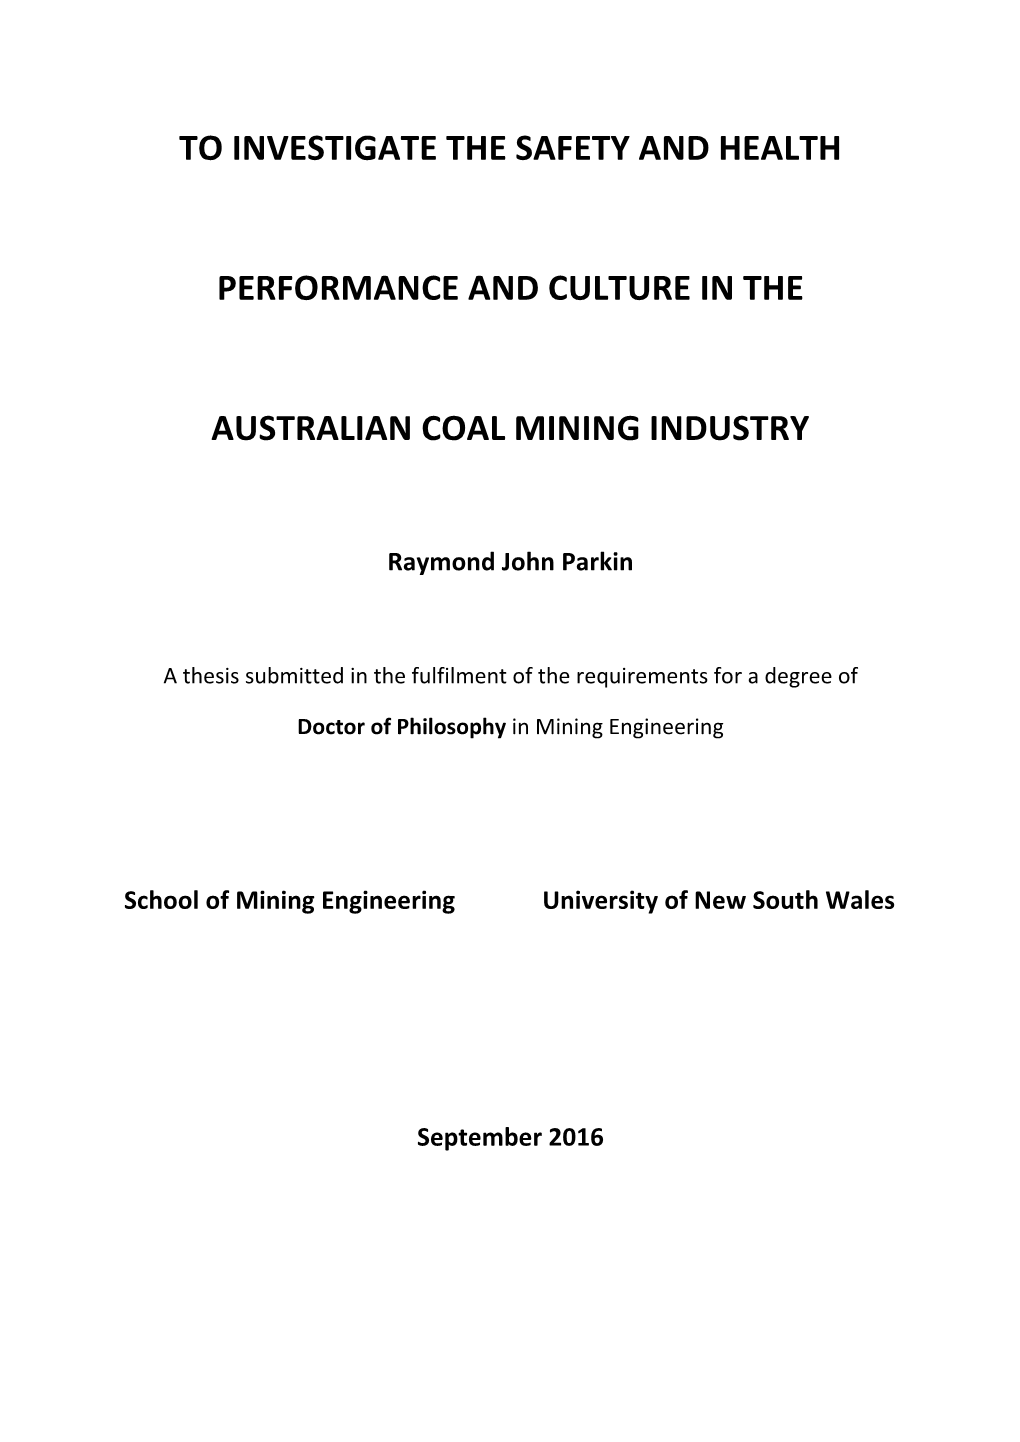 To Investigate the Safety and Health Performance and Culture in the Australian Coal Mining Industry